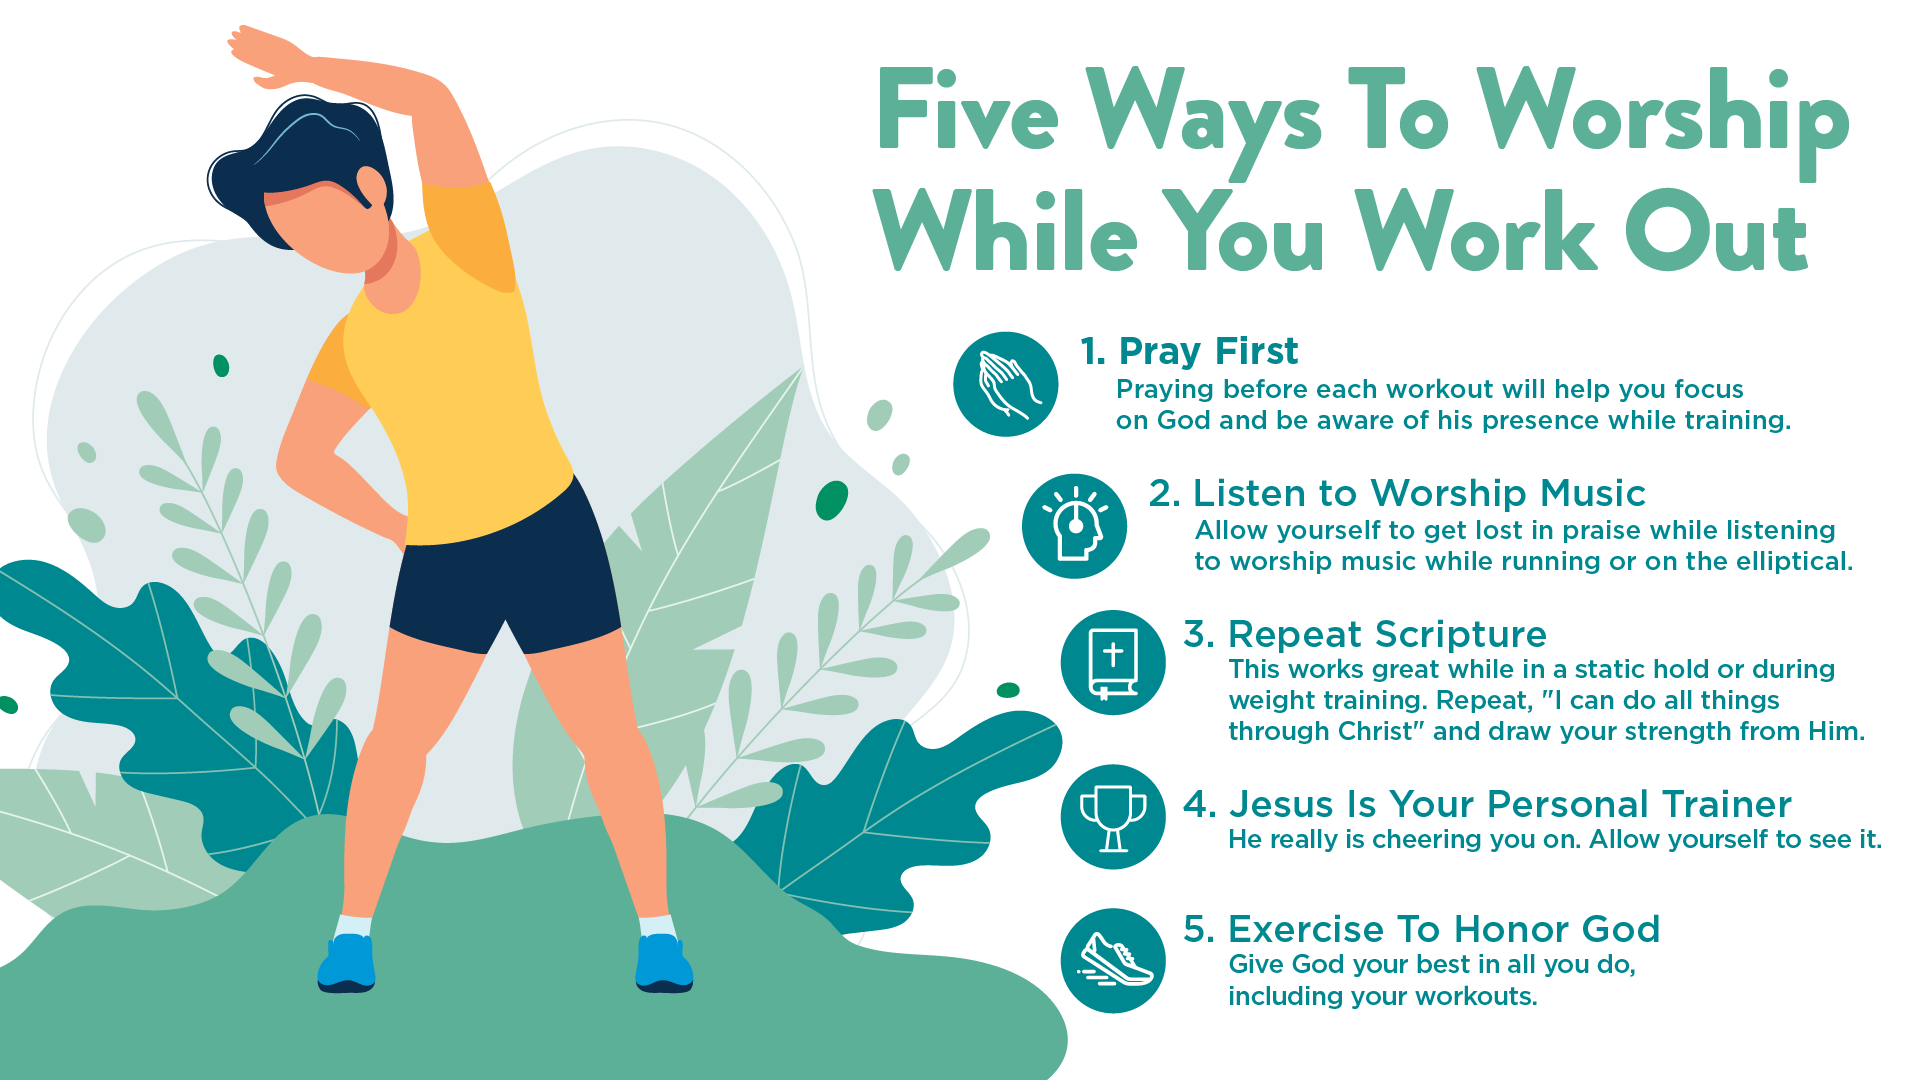 5 Ways to Worship While You Work Out